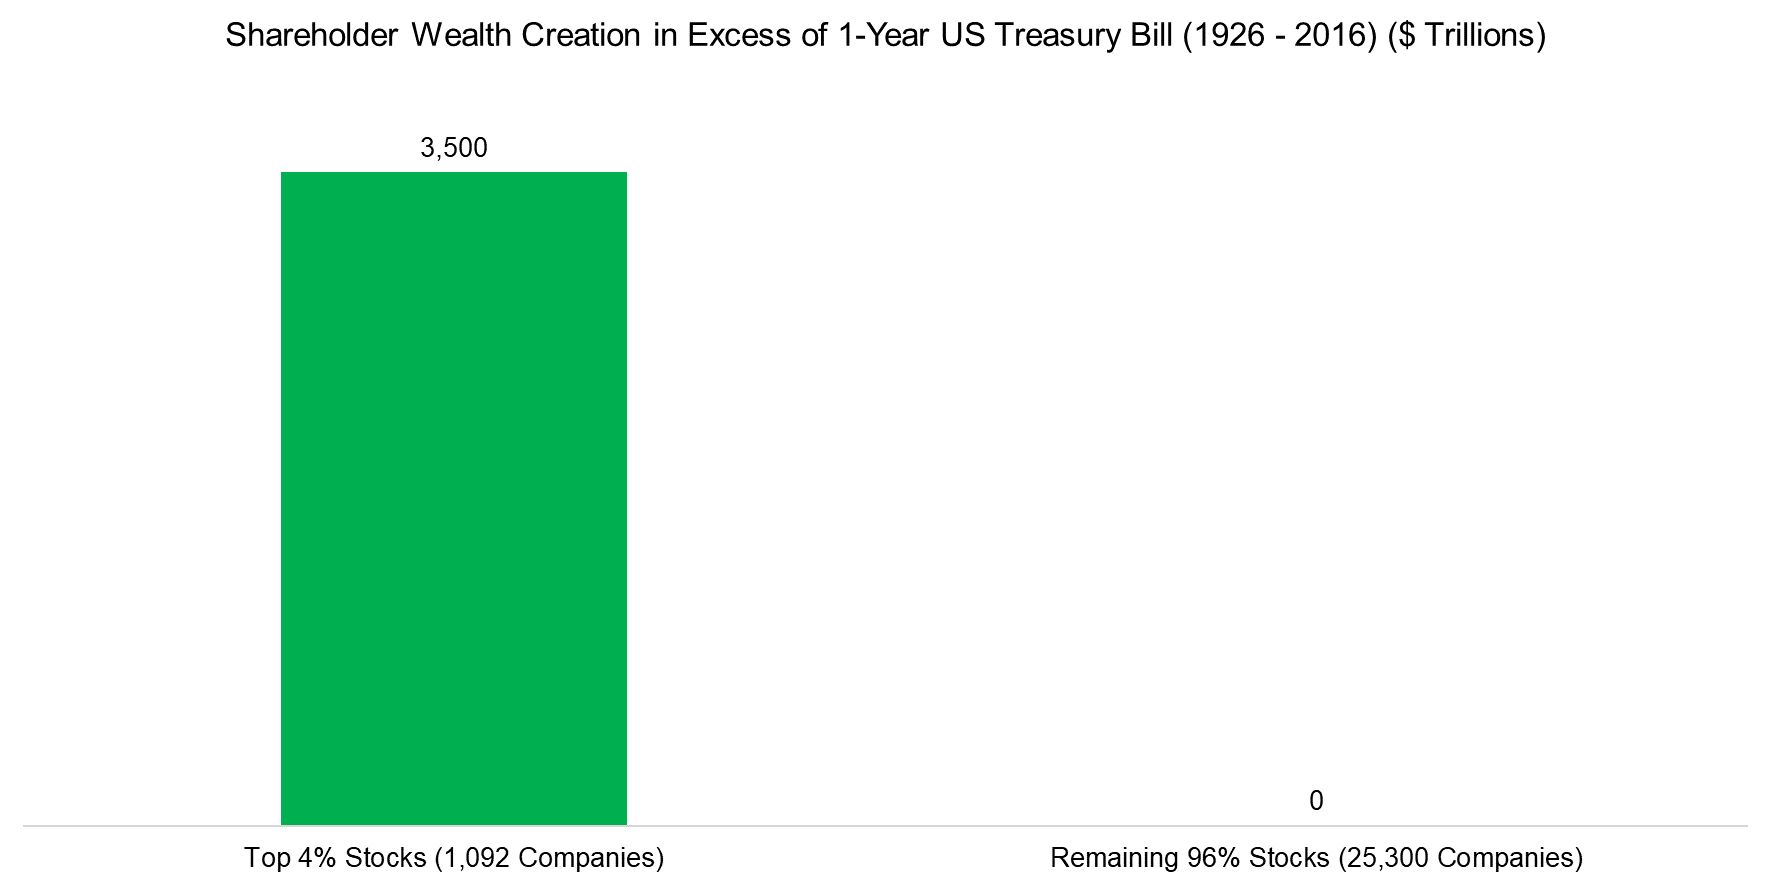 Shareholder Wealth Creation in Excess of 1-Year US Treasury Bill (1926 - 2016) ($ Trillions)